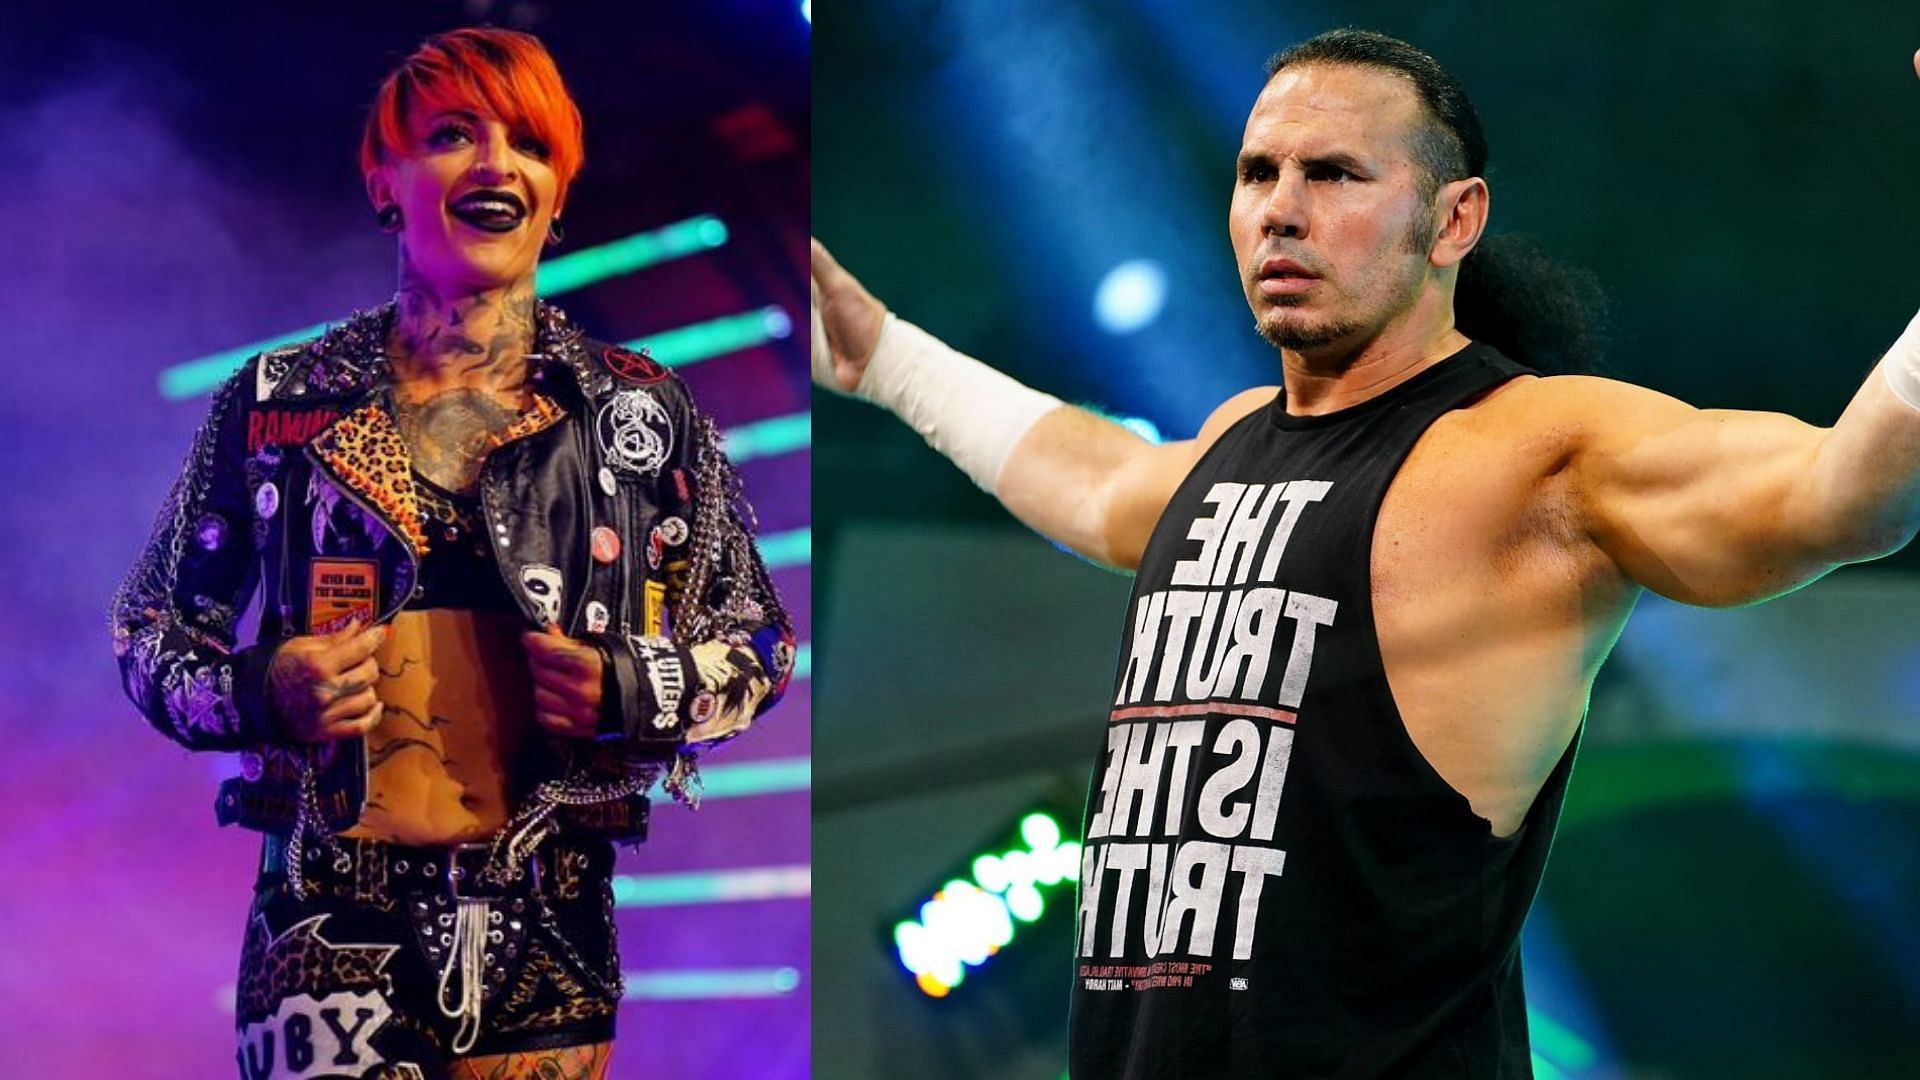 These former WWE superstars have had underwhelming AEW careers so far